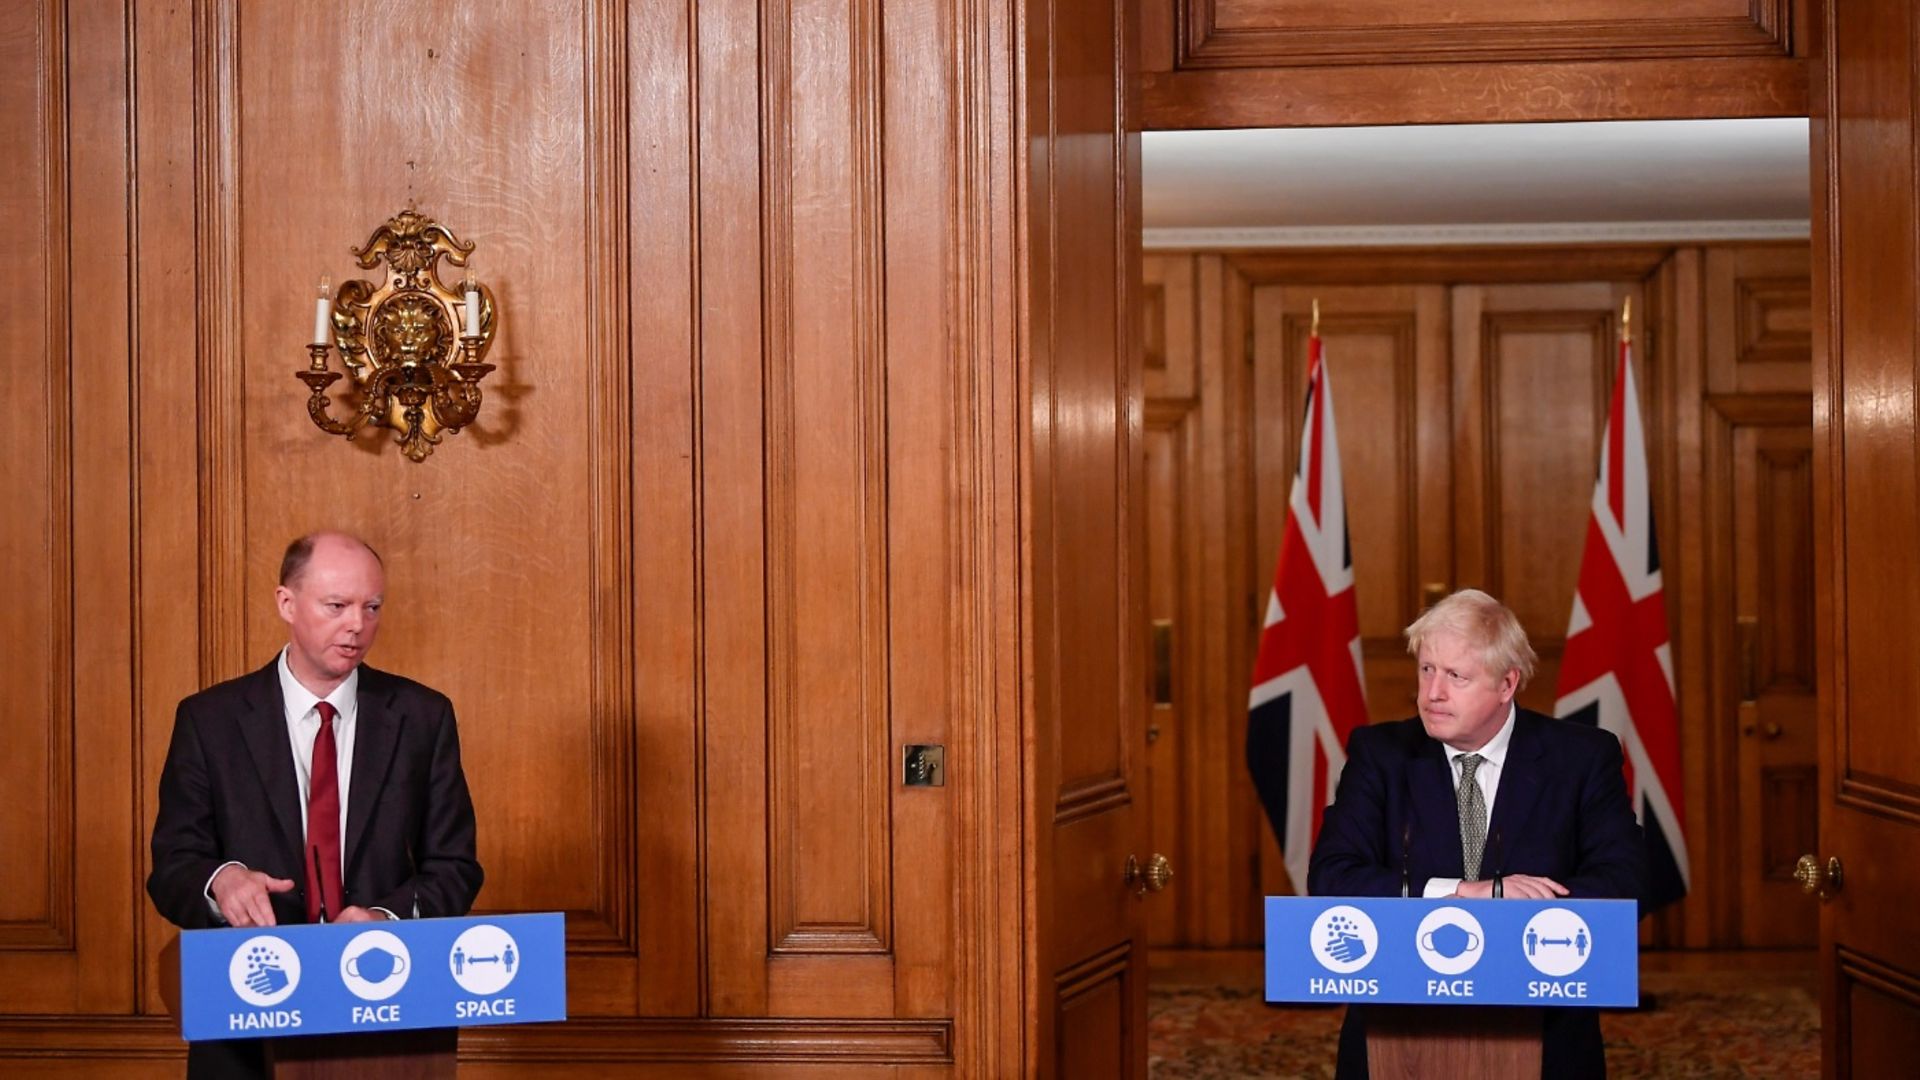 Chris Whitty and Boris Johnson at a Downing Street press conference - Credit: PA Wire/PA Images